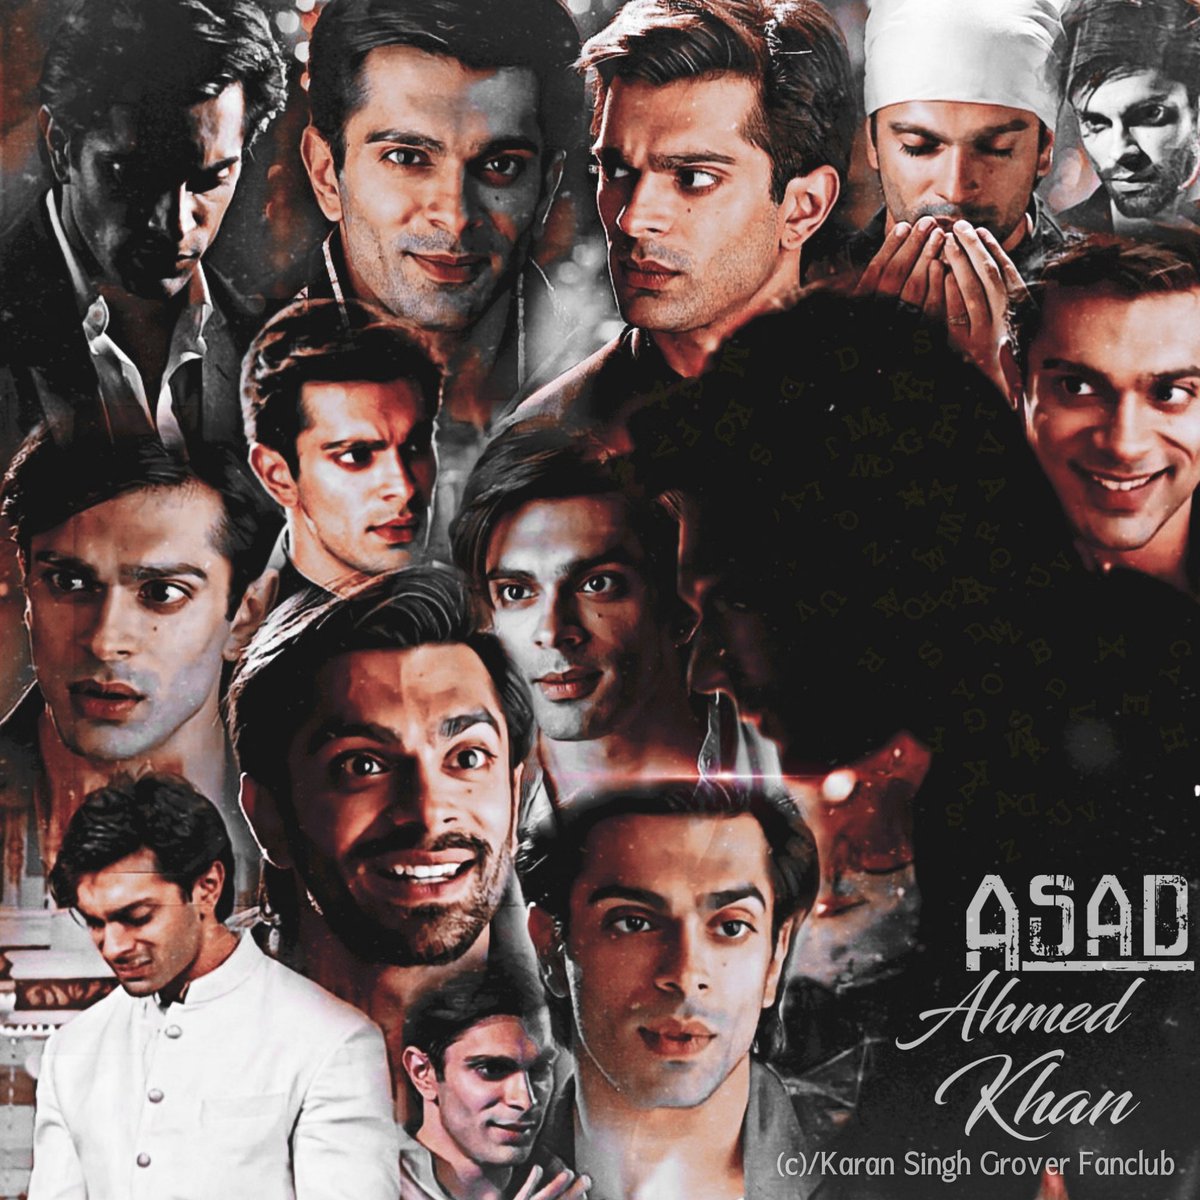 A thread show casting the jaw-dropping gorgeous creations made by  @odriksgian the magician for KSGFC  @indiaforums  #KaranSinghGrover  Asad Ahmed Khan  #QuboolHai